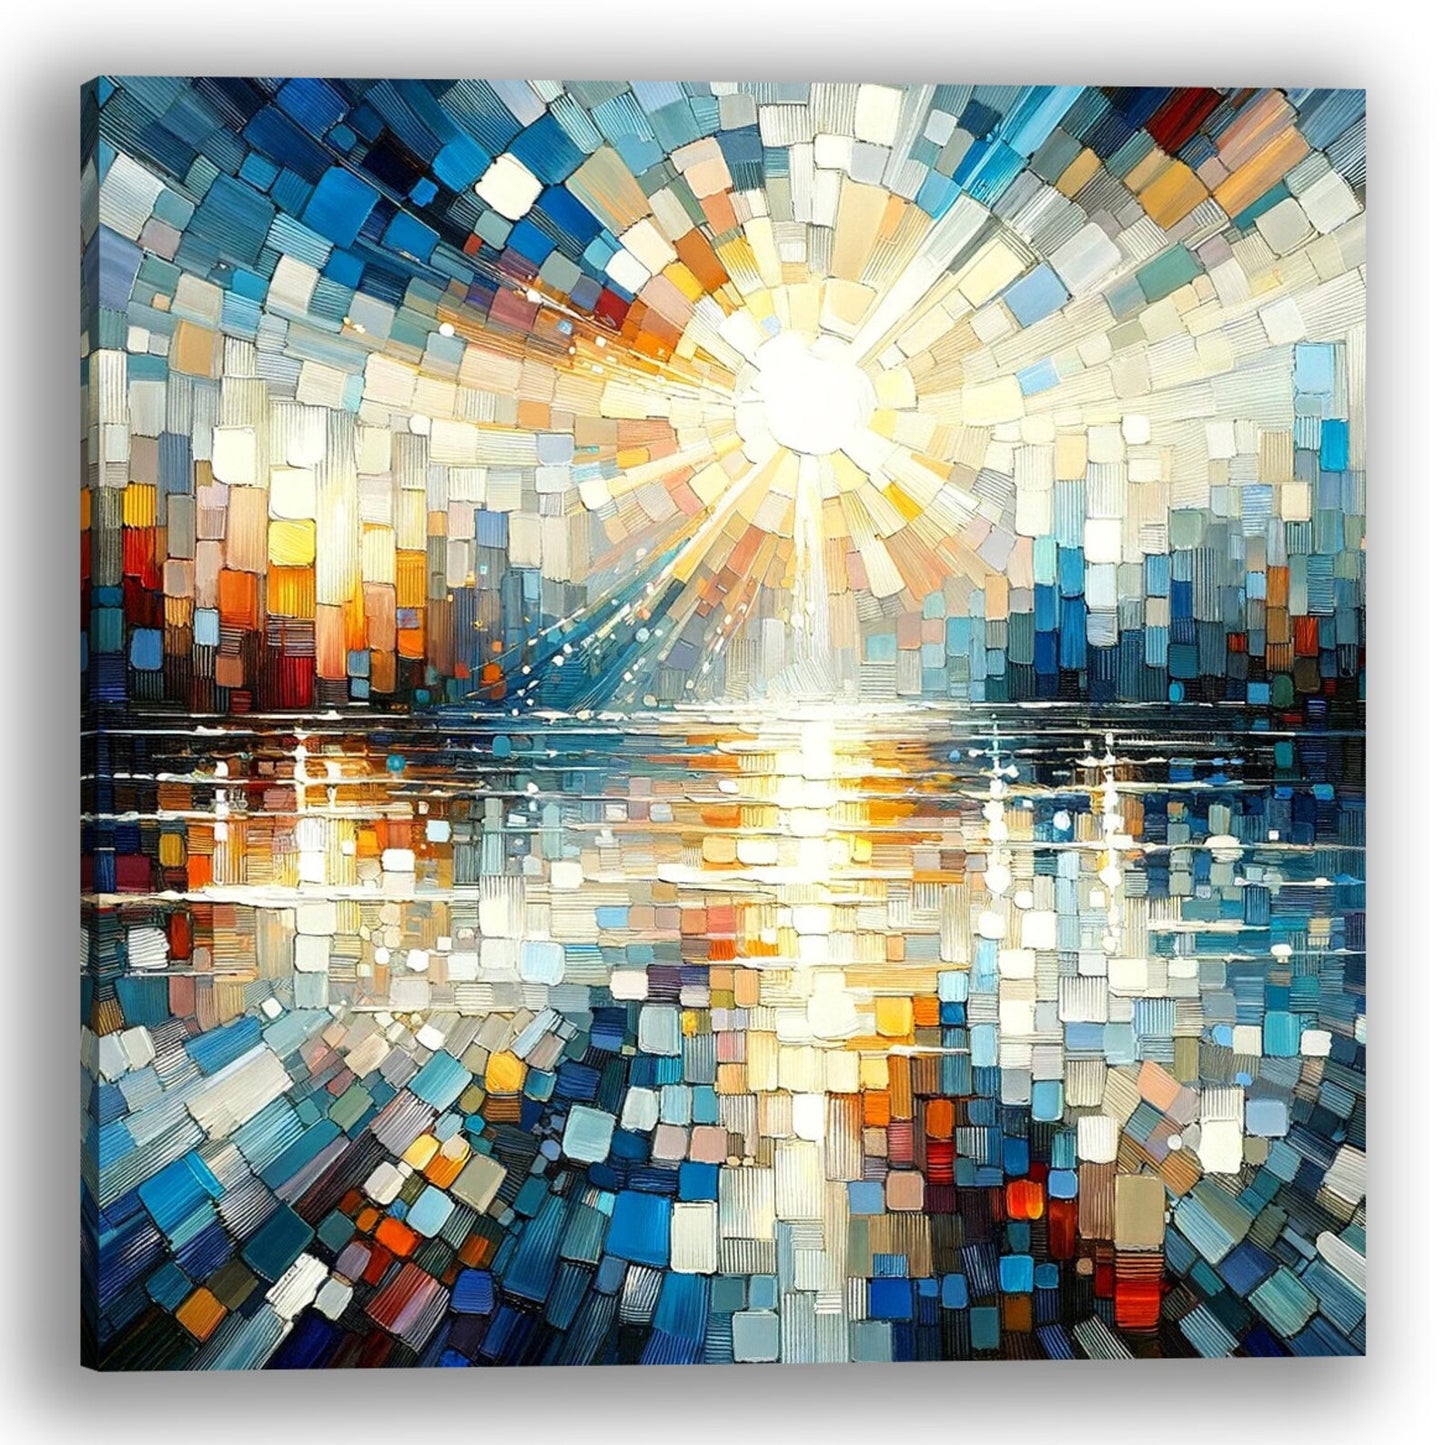 Original Art "Radiant Dawn" - Abstract Sunrise knife Painting, Cubist Light Reflection Art, Contemporary Water Landscape Canvas